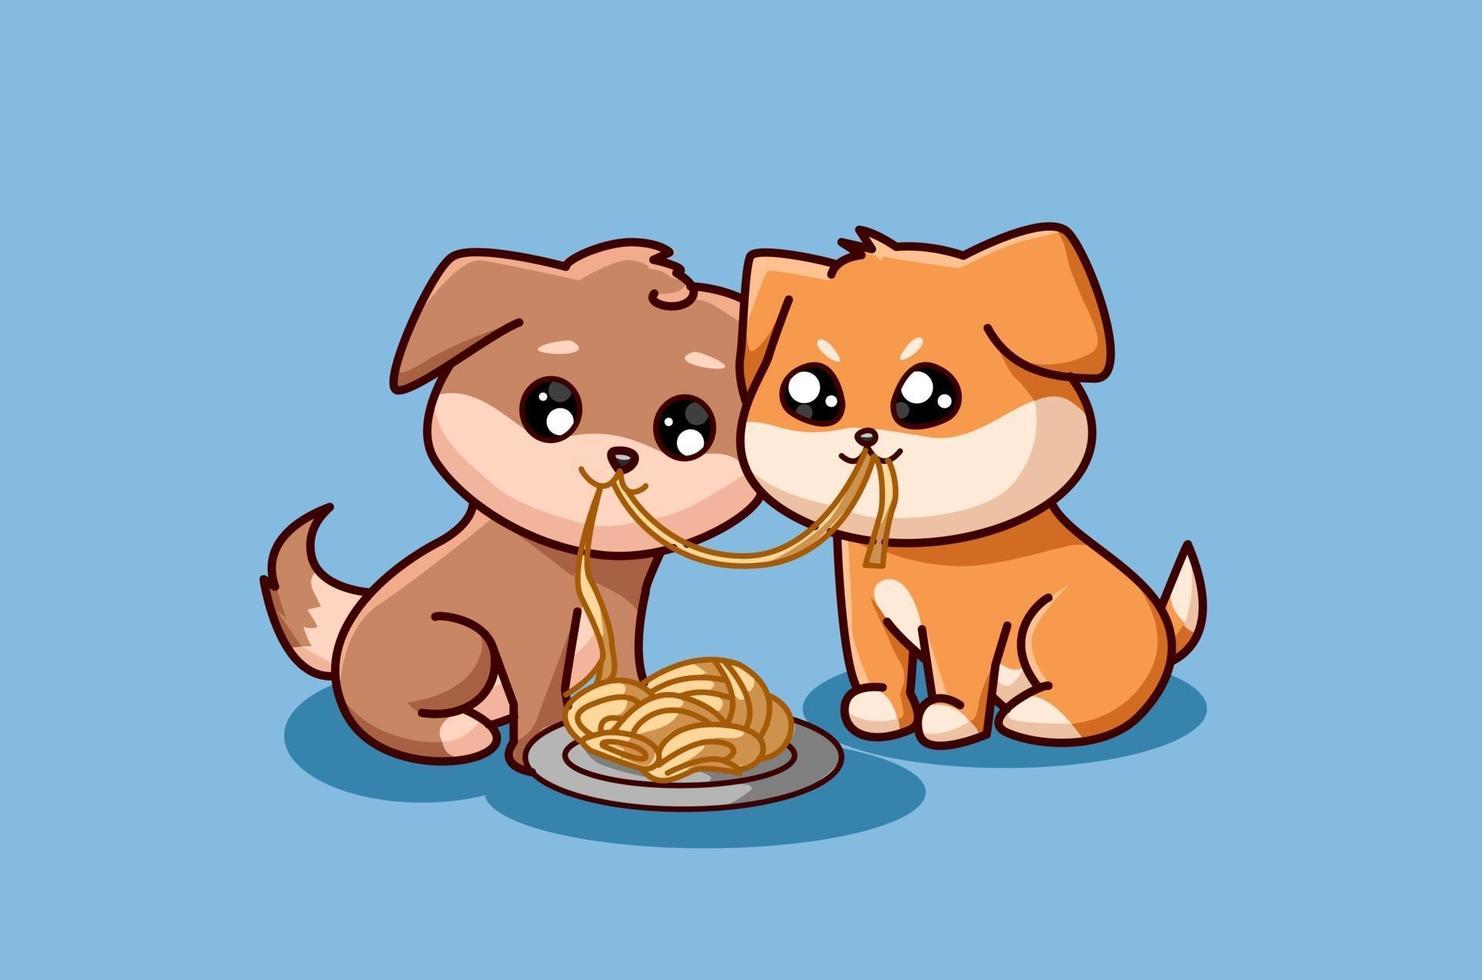 Two small dogs eating together vector